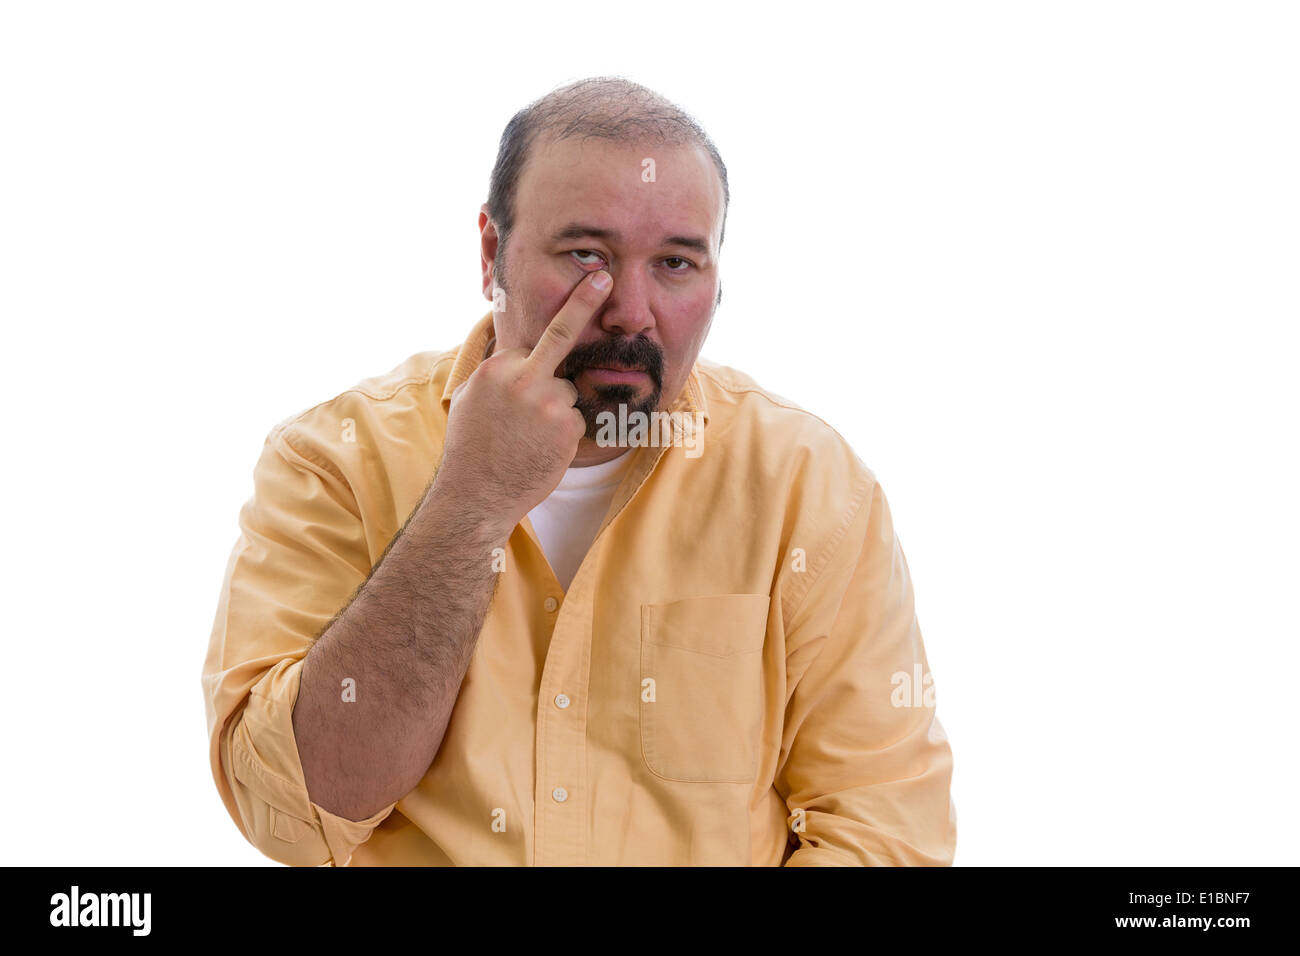 Man gesturing touching his nose with a finger showing that he knows a secret and the viewer would be wise to pay special heed Stock Photo